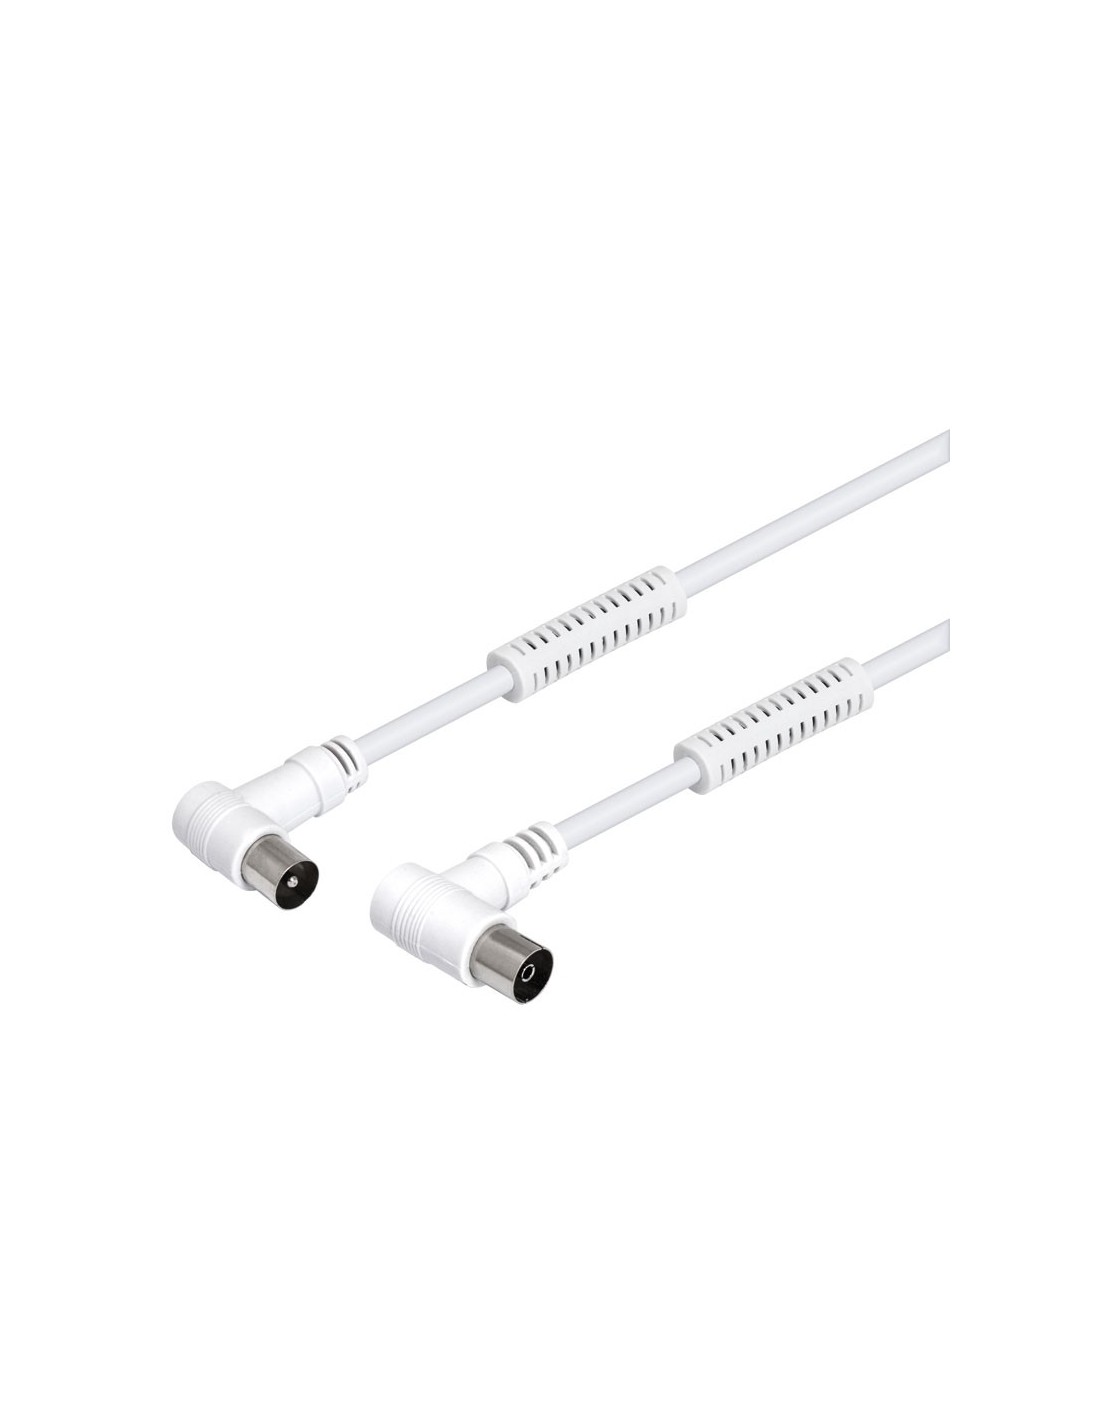 Cable coaxial antena TV - 1 m